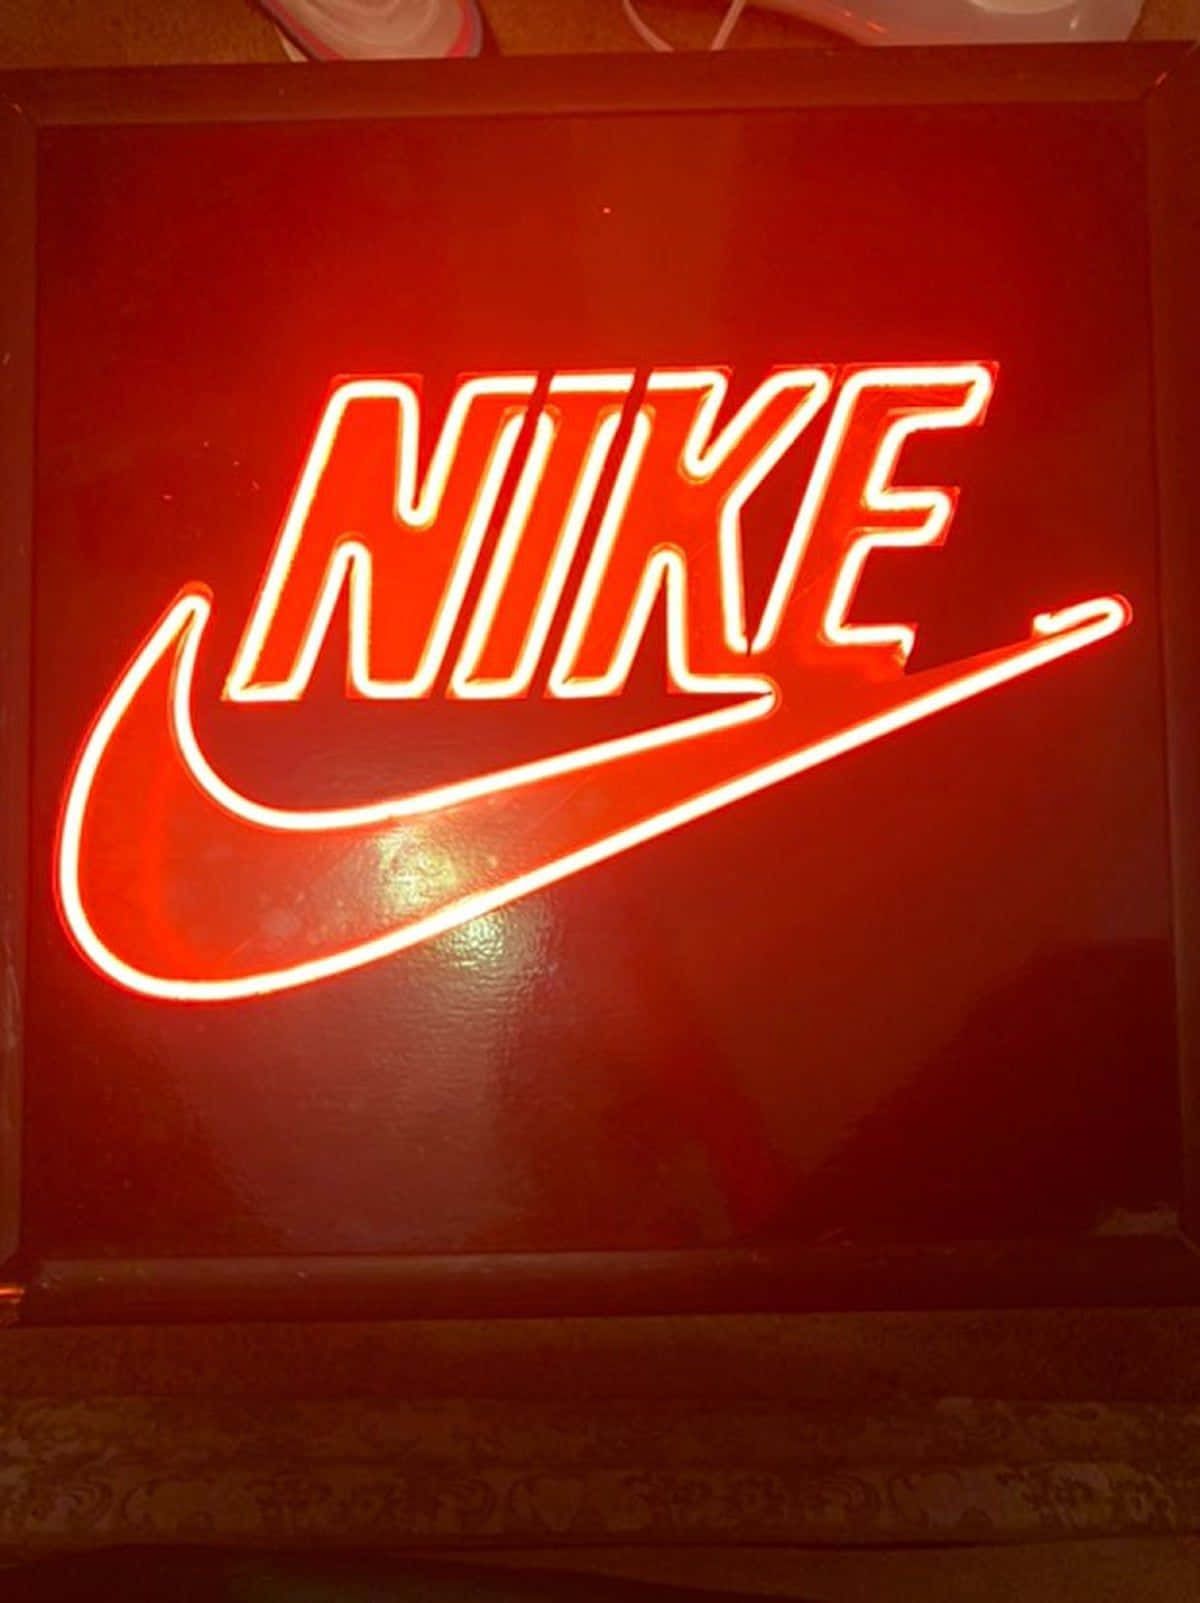 A neon sign of the Nike logo in red - Neon red